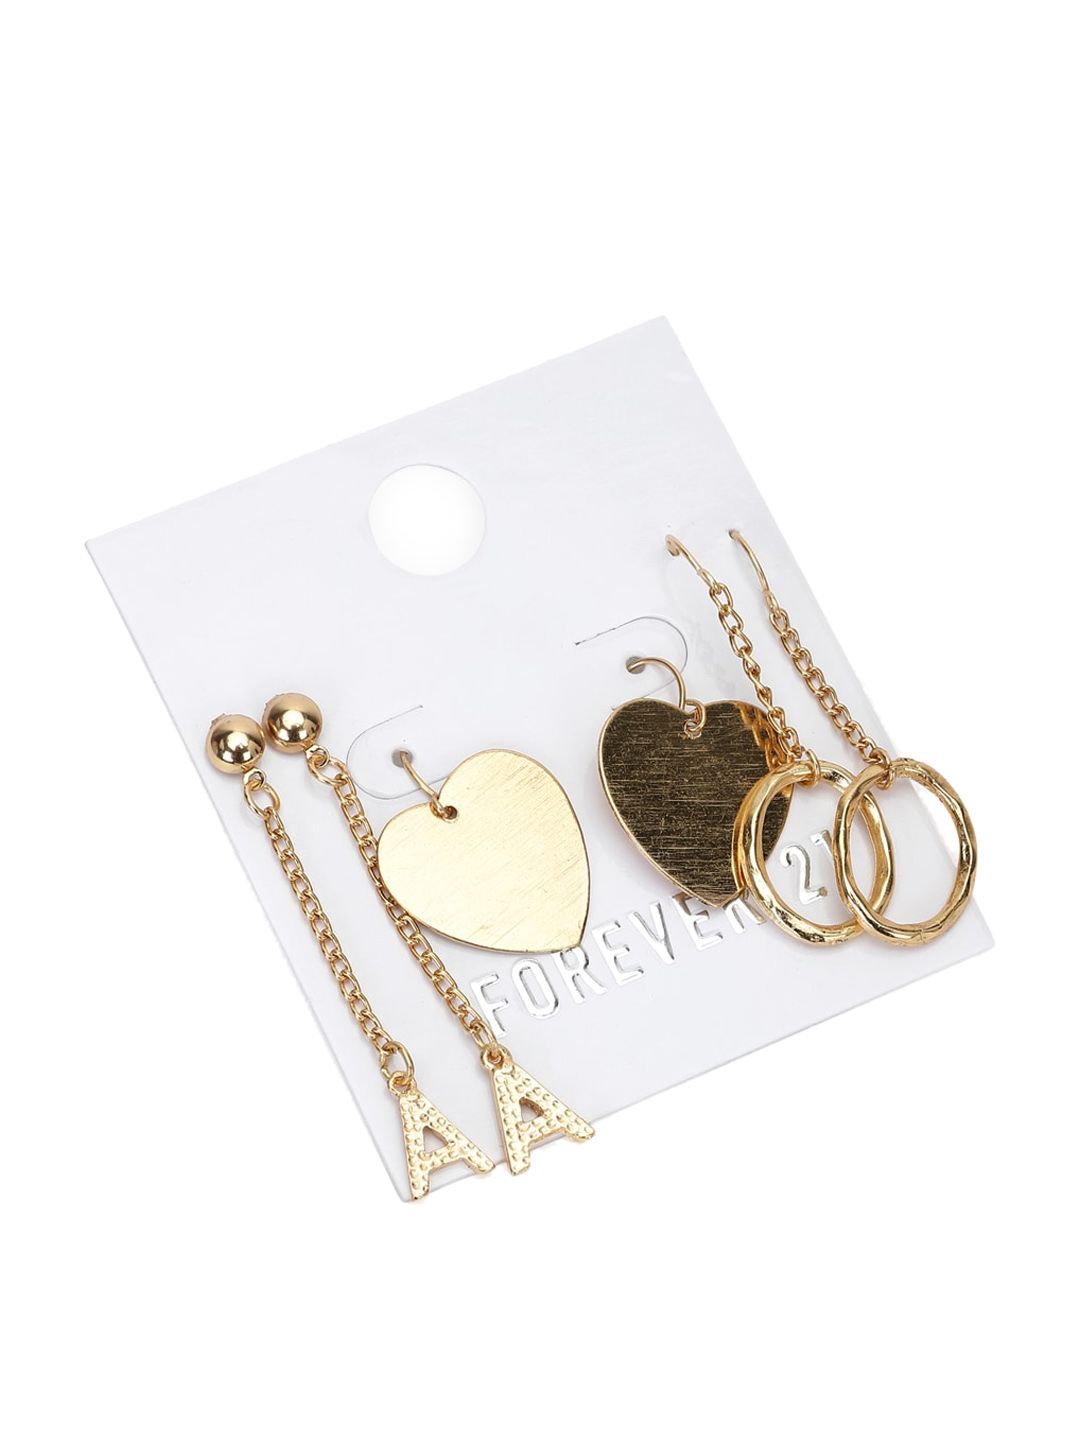 FOREVER 21 Set Of 3 Gold-Toned Contemporary Earrings Price in India